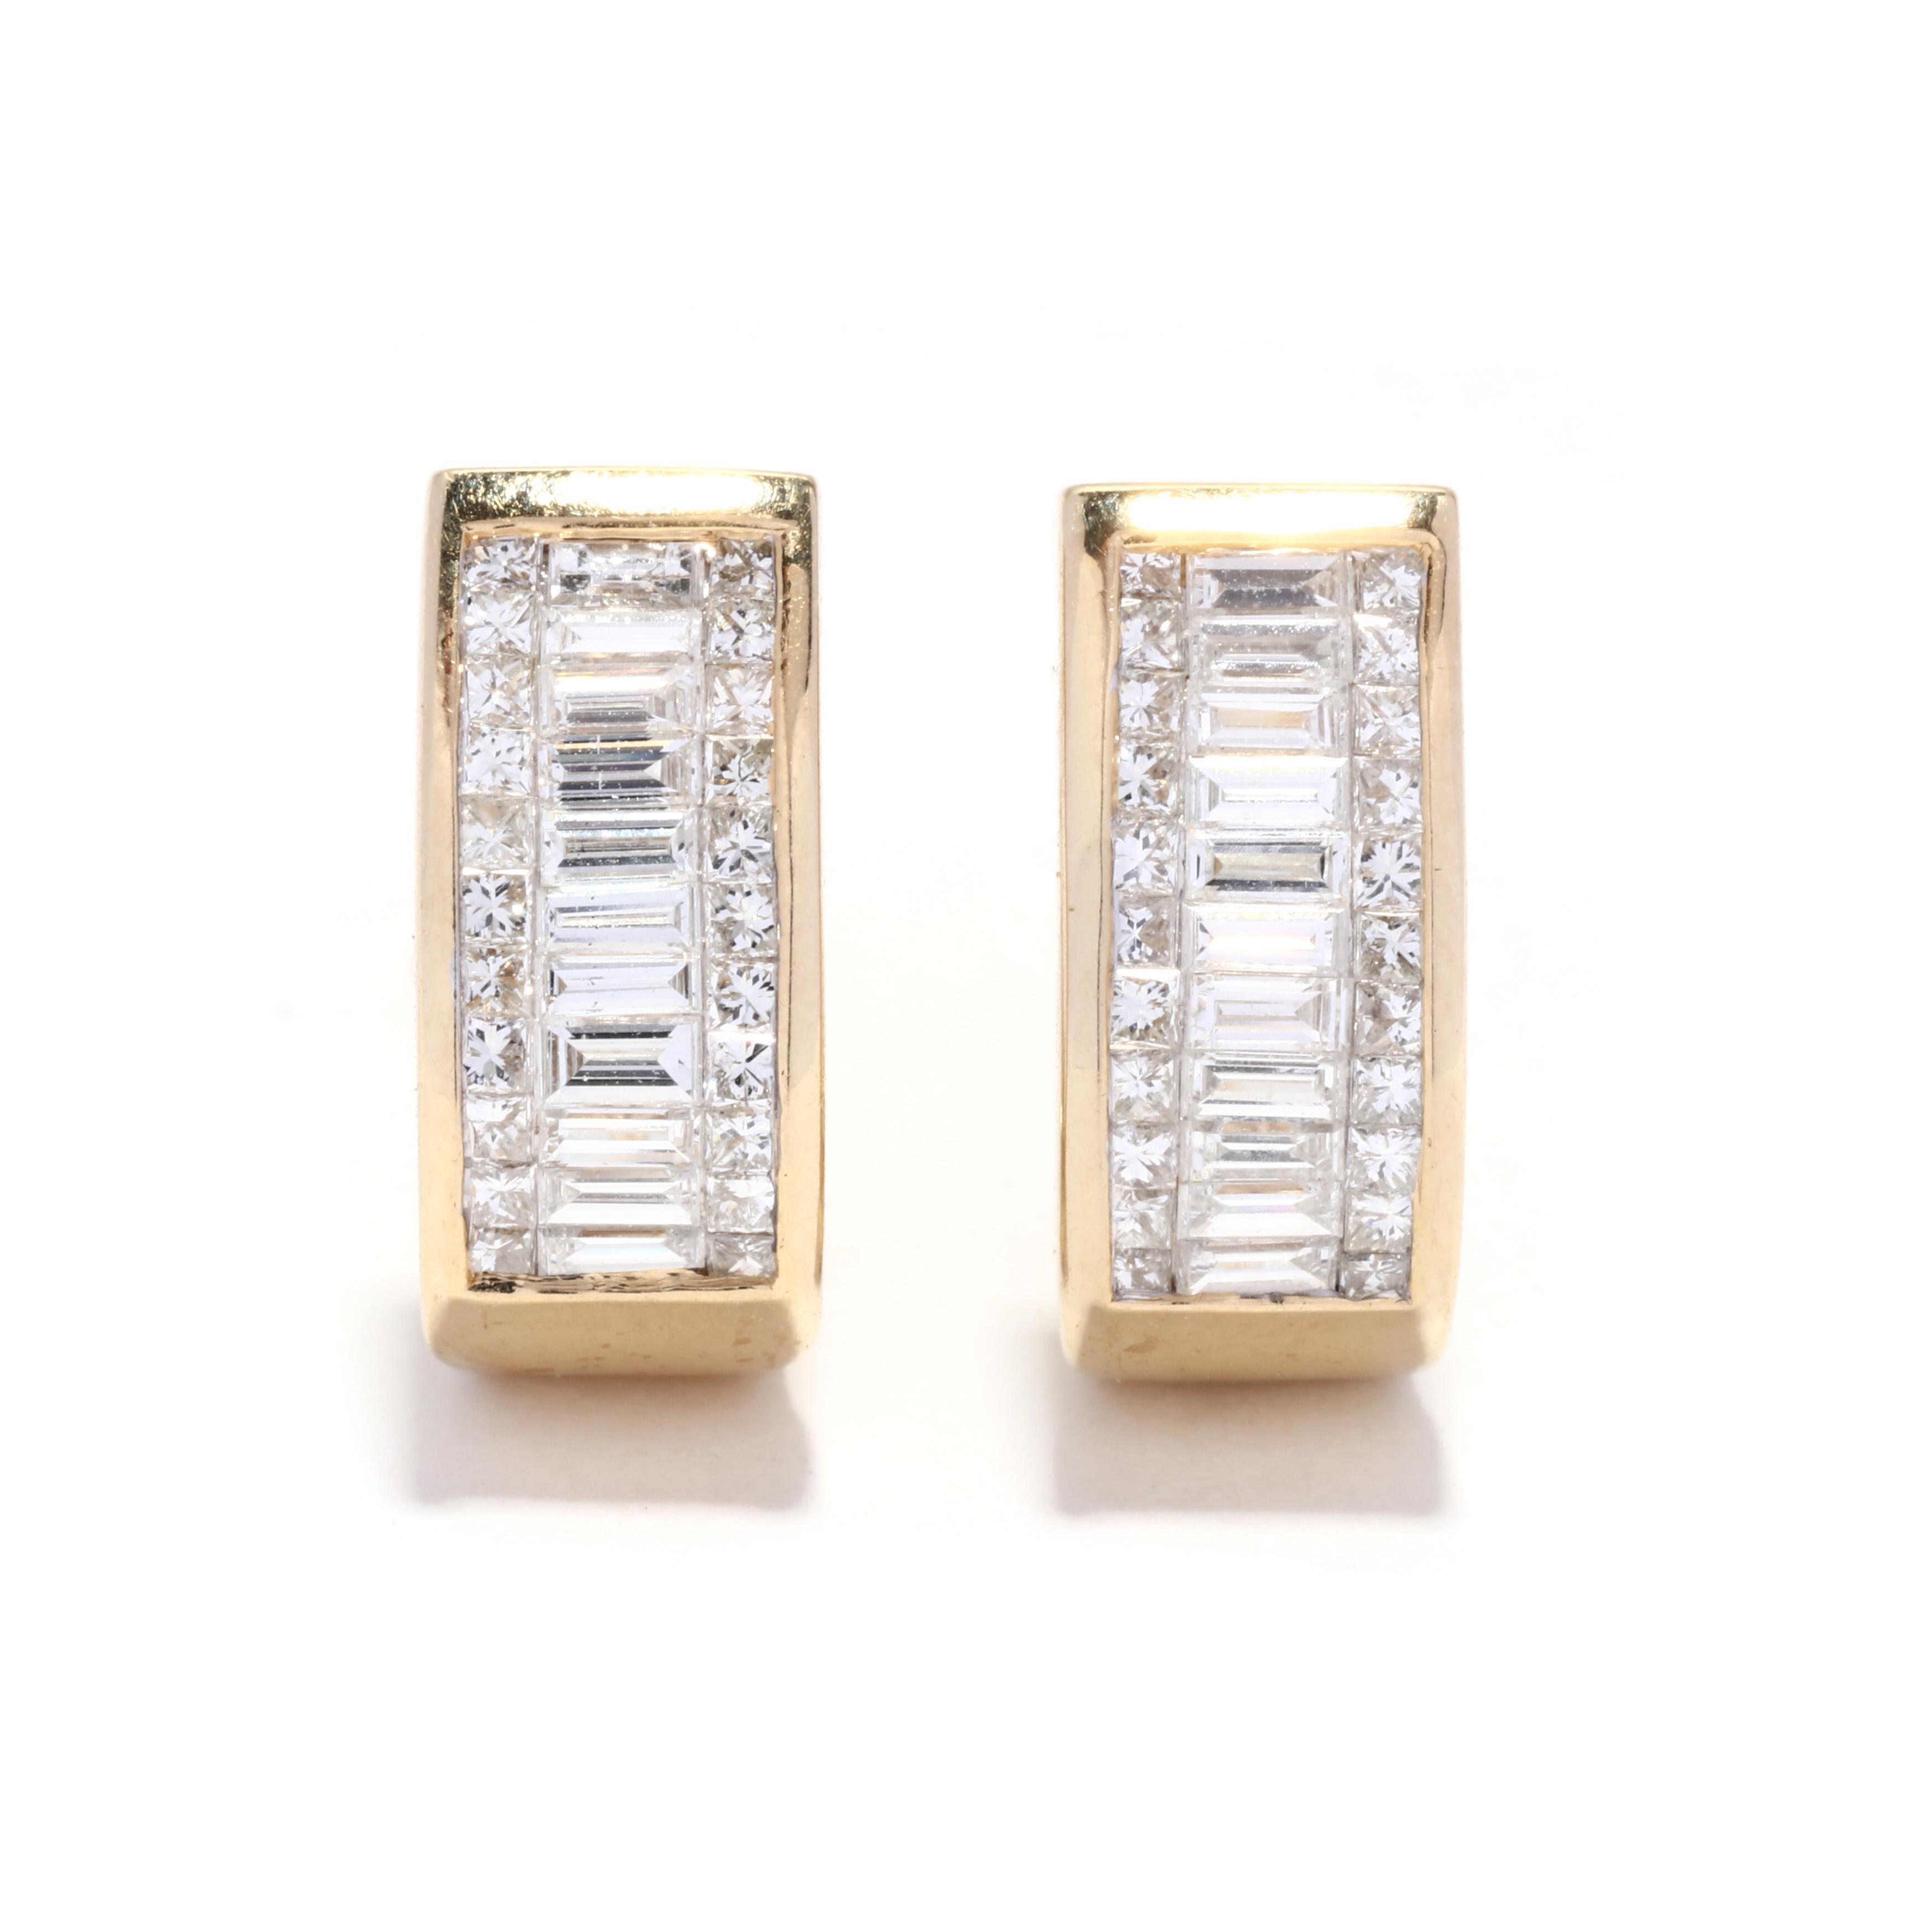 A pair of vintage 14 karat yellow gold baguette diamond hoop earrings. These wide hoops feature a J hoop design with horizontal illusion set baguette cut diamonds weighing approximately 1 total carat with a row of princess cut diamonds on either